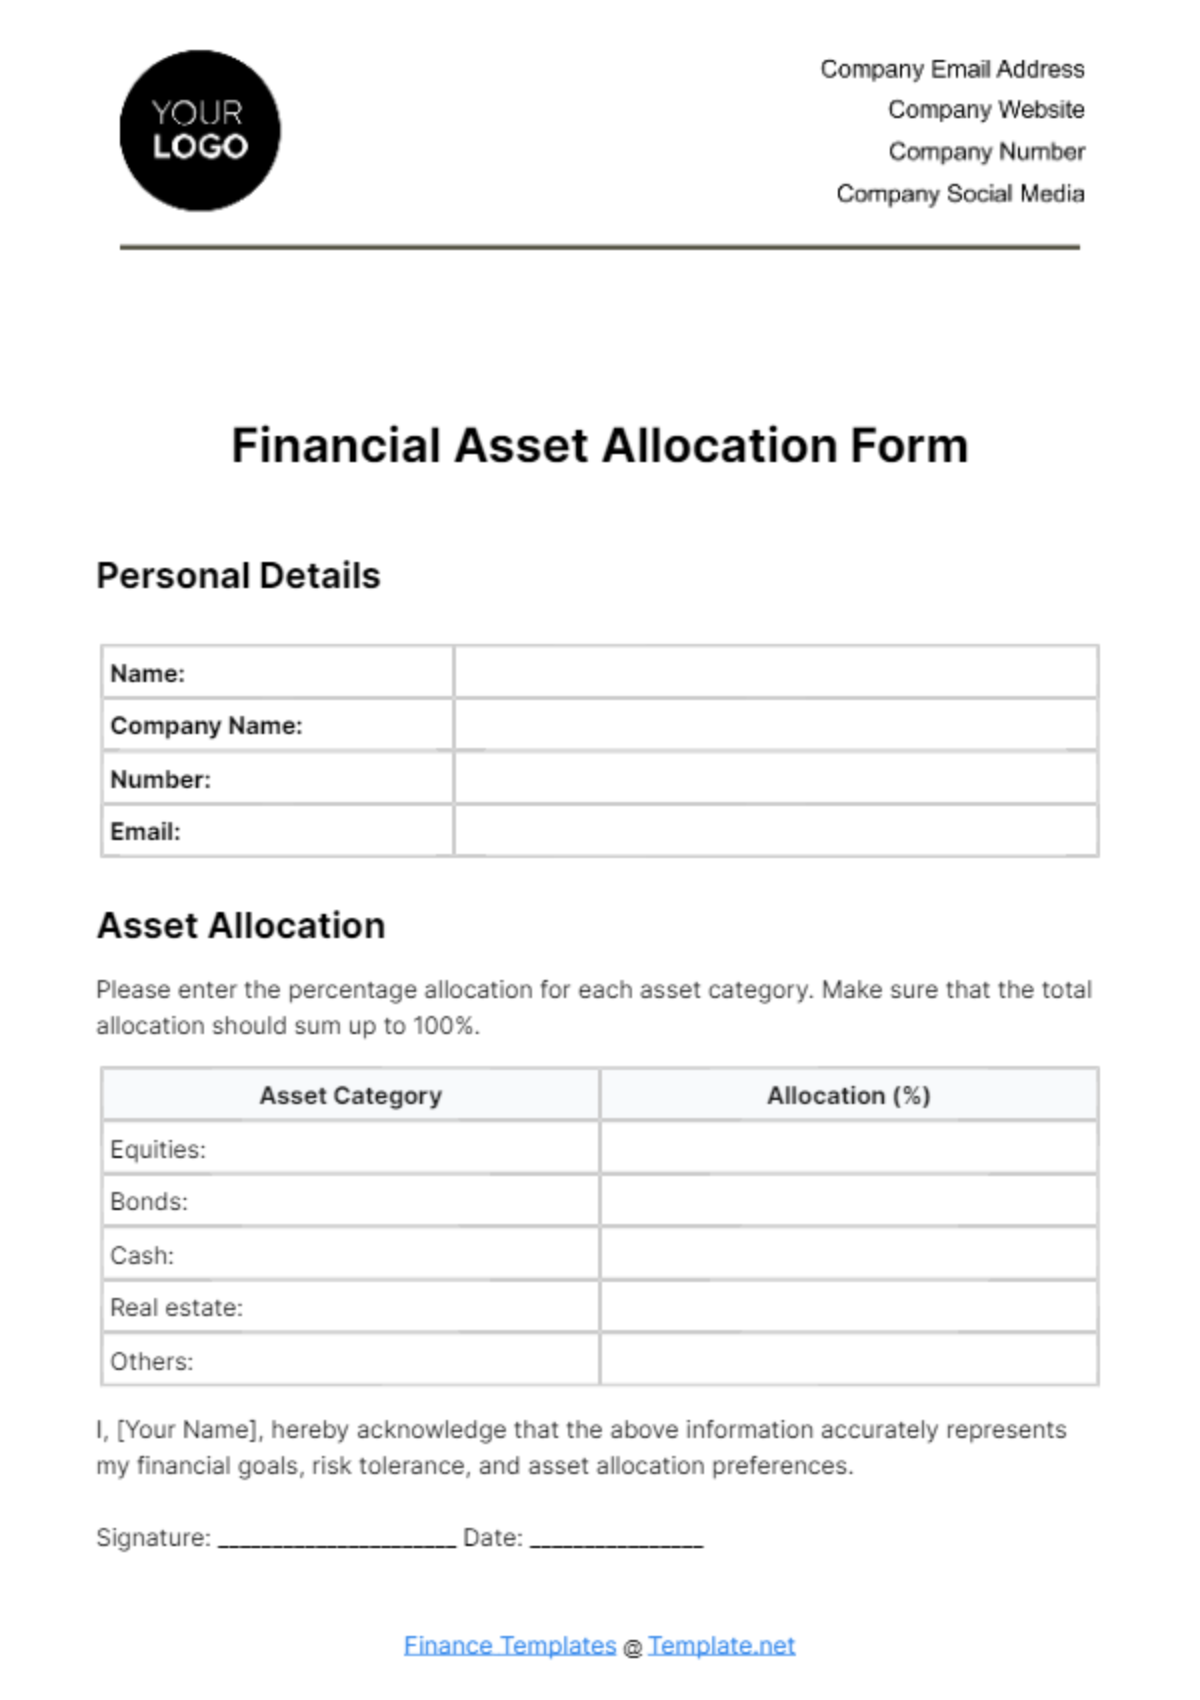 Free Financial Asset Allocation Form Template